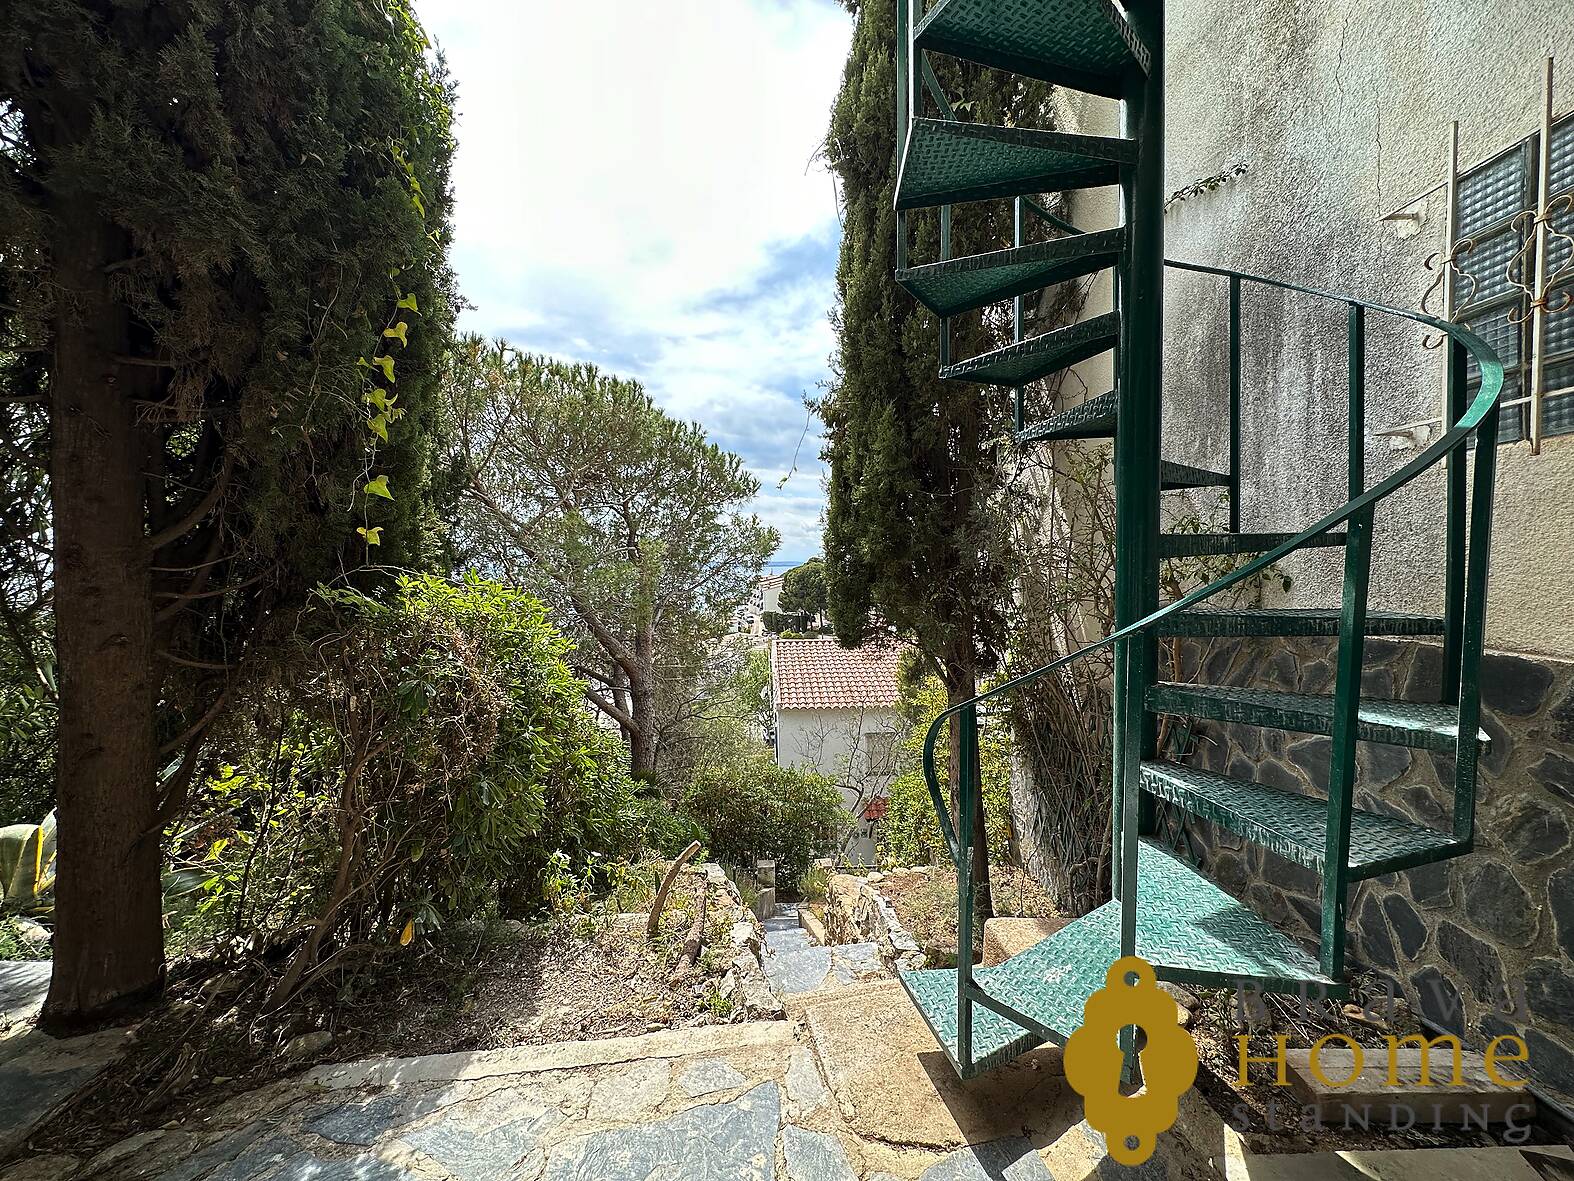 House with sea view and close to the beach for sale in Rosas - Almadrava